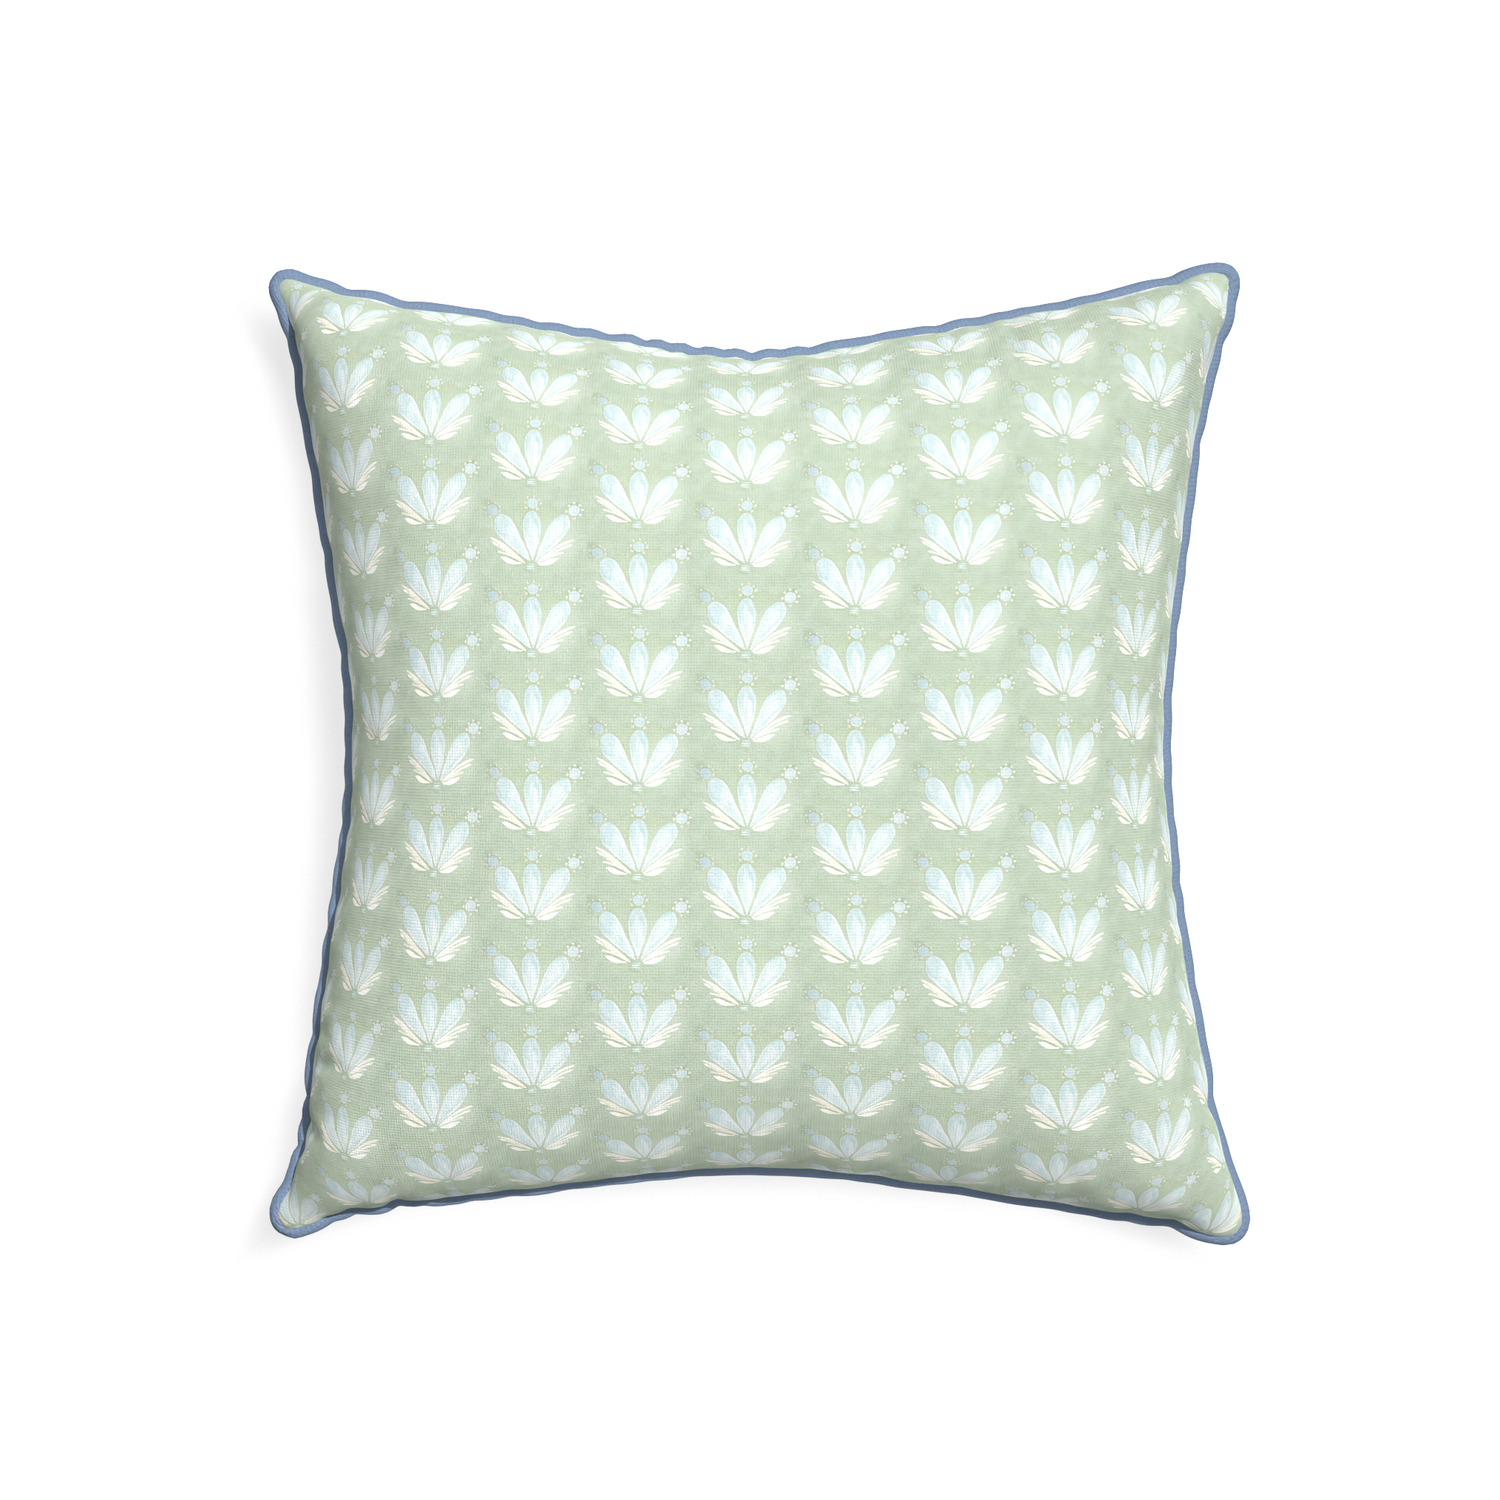 22-square serena sea salt custom pillow with sky piping on white background